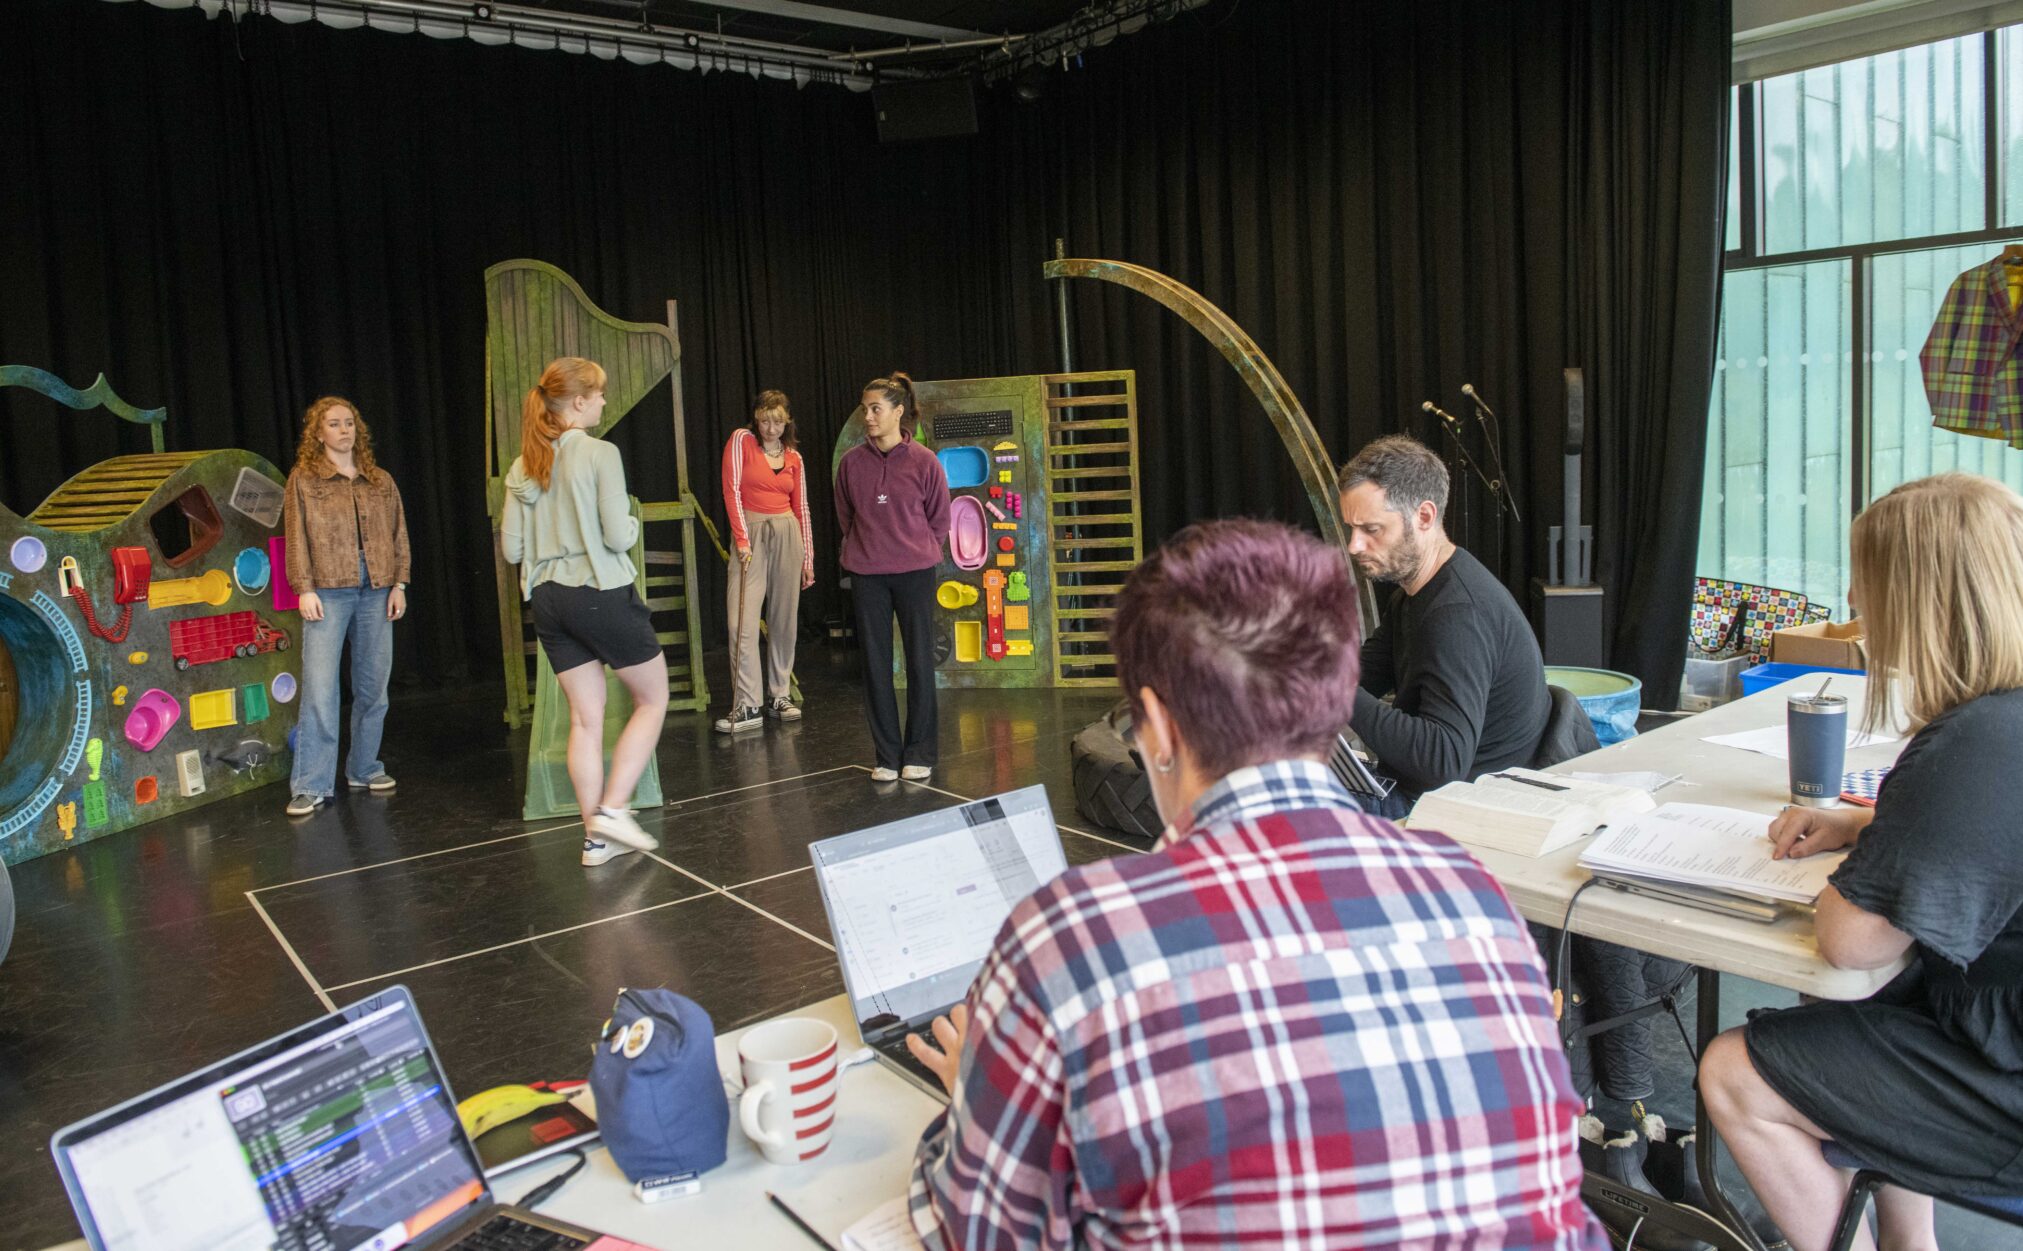 The cast and production team in Twelfth Night rehearsals. (Photo:Tracey Whitefoot)